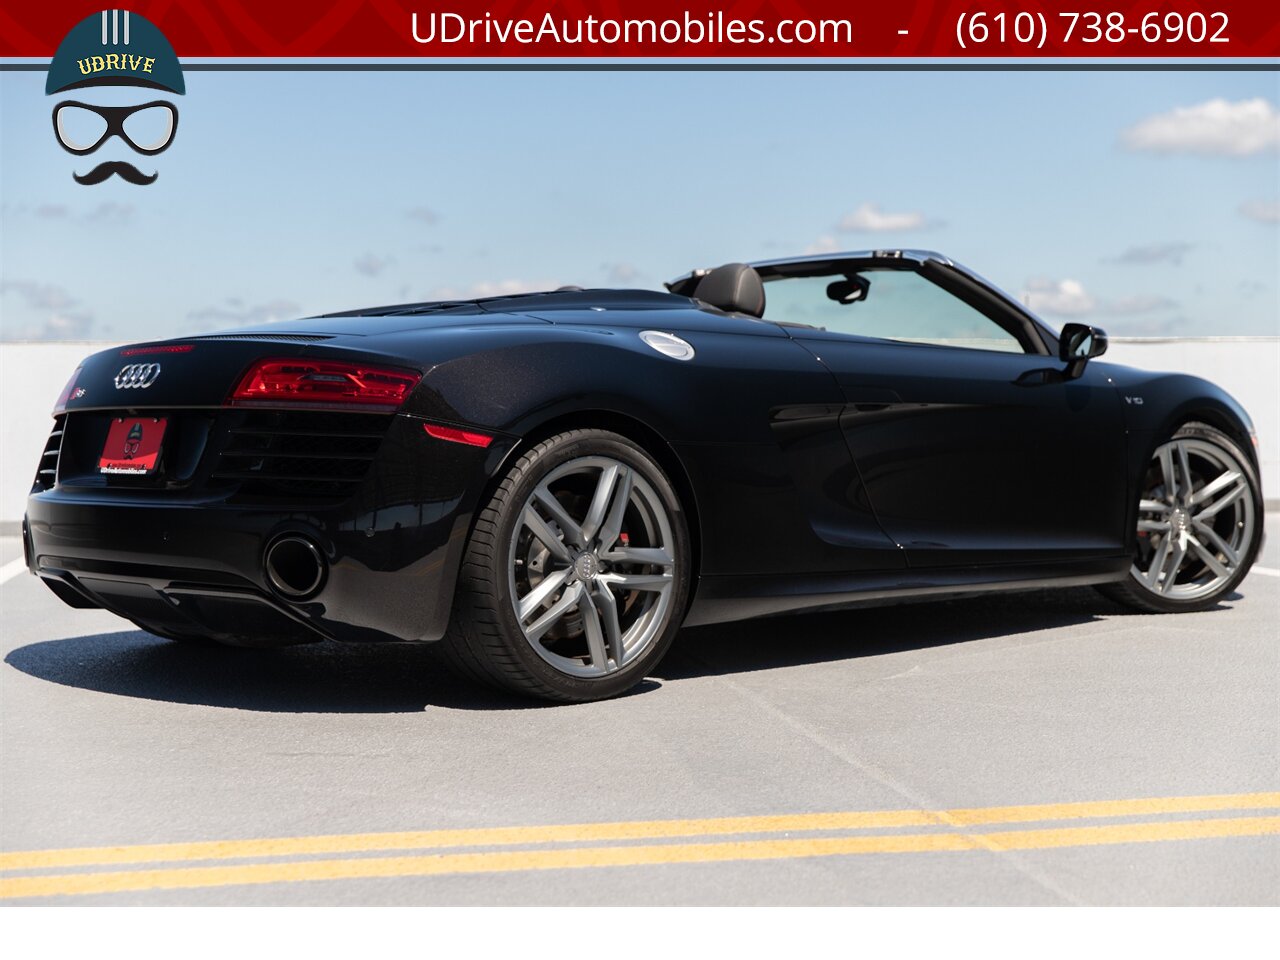 2014 Audi R8 5.2 V10 Quattro Spyder 6 Speed Manual 2k Miles  Extremely RARE 1 of 1 Color Combo - Photo 3 - West Chester, PA 19382